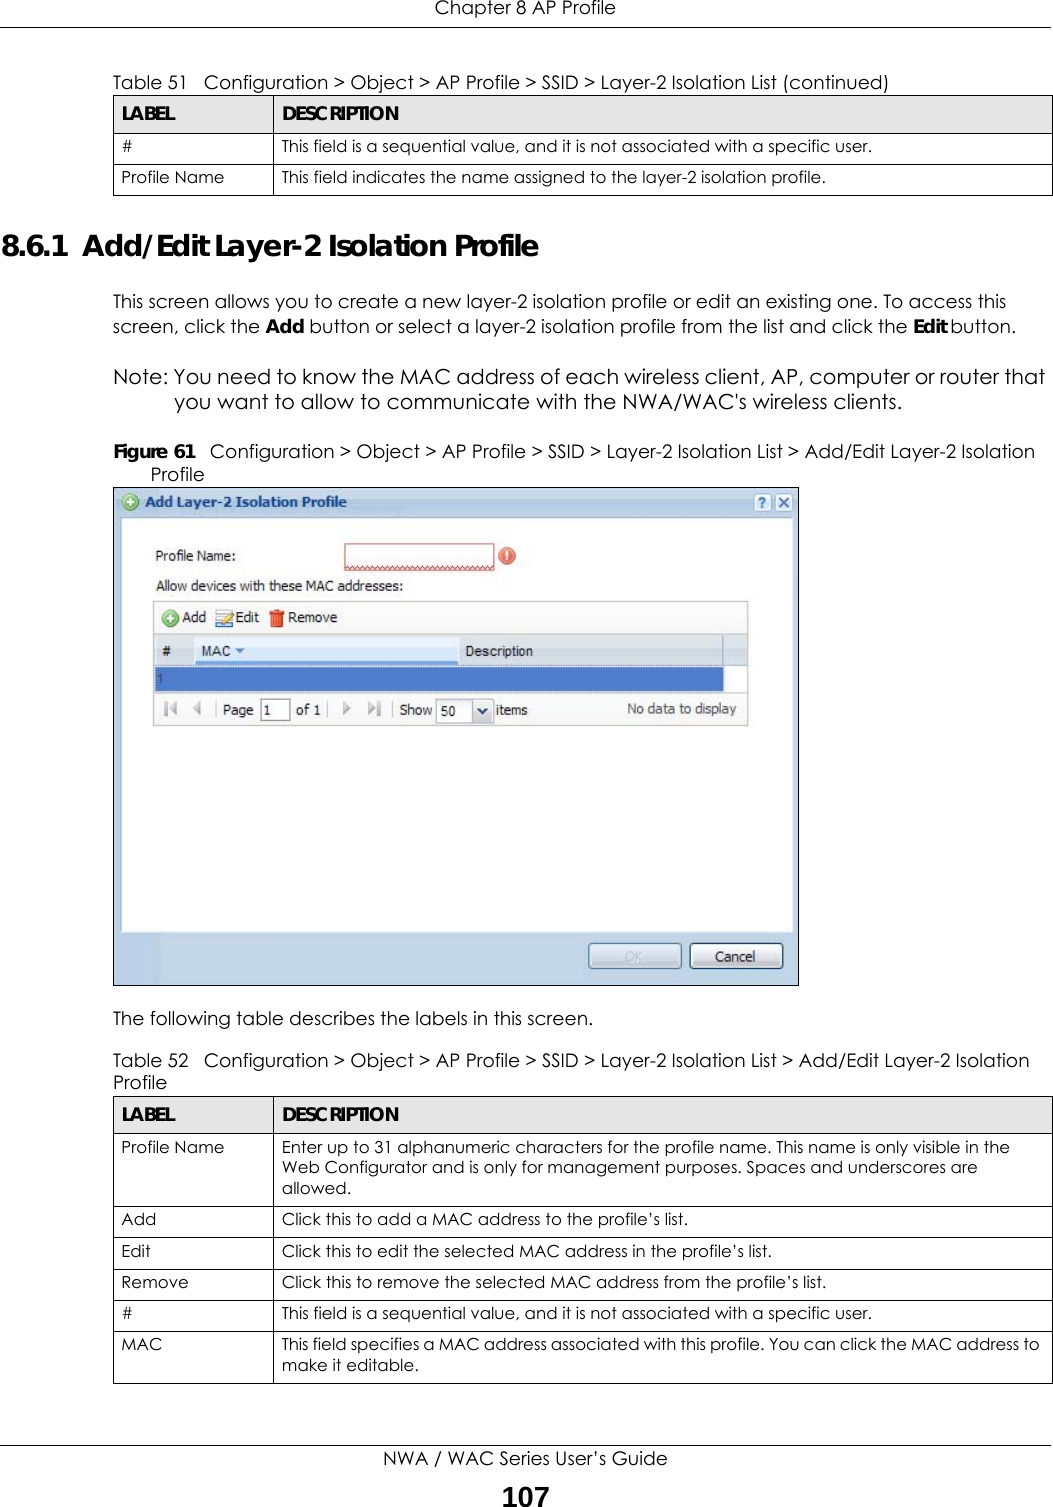 Chapter 8 AP ProfileNWA / WAC Series User’s Guide1078.6.1  Add/Edit Layer-2 Isolation ProfileThis screen allows you to create a new layer-2 isolation profile or edit an existing one. To access this screen, click the Add button or select a layer-2 isolation profile from the list and click the Edit button.Note: You need to know the MAC address of each wireless client, AP, computer or router that you want to allow to communicate with the NWA/WAC&apos;s wireless clients.Figure 61   Configuration &gt; Object &gt; AP Profile &gt; SSID &gt; Layer-2 Isolation List &gt; Add/Edit Layer-2 Isolation ProfileThe following table describes the labels in this screen.  # This field is a sequential value, and it is not associated with a specific user.Profile Name This field indicates the name assigned to the layer-2 isolation profile.Table 51   Configuration &gt; Object &gt; AP Profile &gt; SSID &gt; Layer-2 Isolation List (continued)LABEL DESCRIPTIONTable 52   Configuration &gt; Object &gt; AP Profile &gt; SSID &gt; Layer-2 Isolation List &gt; Add/Edit Layer-2 Isolation ProfileLABEL DESCRIPTIONProfile Name Enter up to 31 alphanumeric characters for the profile name. This name is only visible in the Web Configurator and is only for management purposes. Spaces and underscores are allowed.Add Click this to add a MAC address to the profile’s list.Edit Click this to edit the selected MAC address in the profile’s list.Remove Click this to remove the selected MAC address from the profile’s list.# This field is a sequential value, and it is not associated with a specific user.MAC This field specifies a MAC address associated with this profile. You can click the MAC address to make it editable.